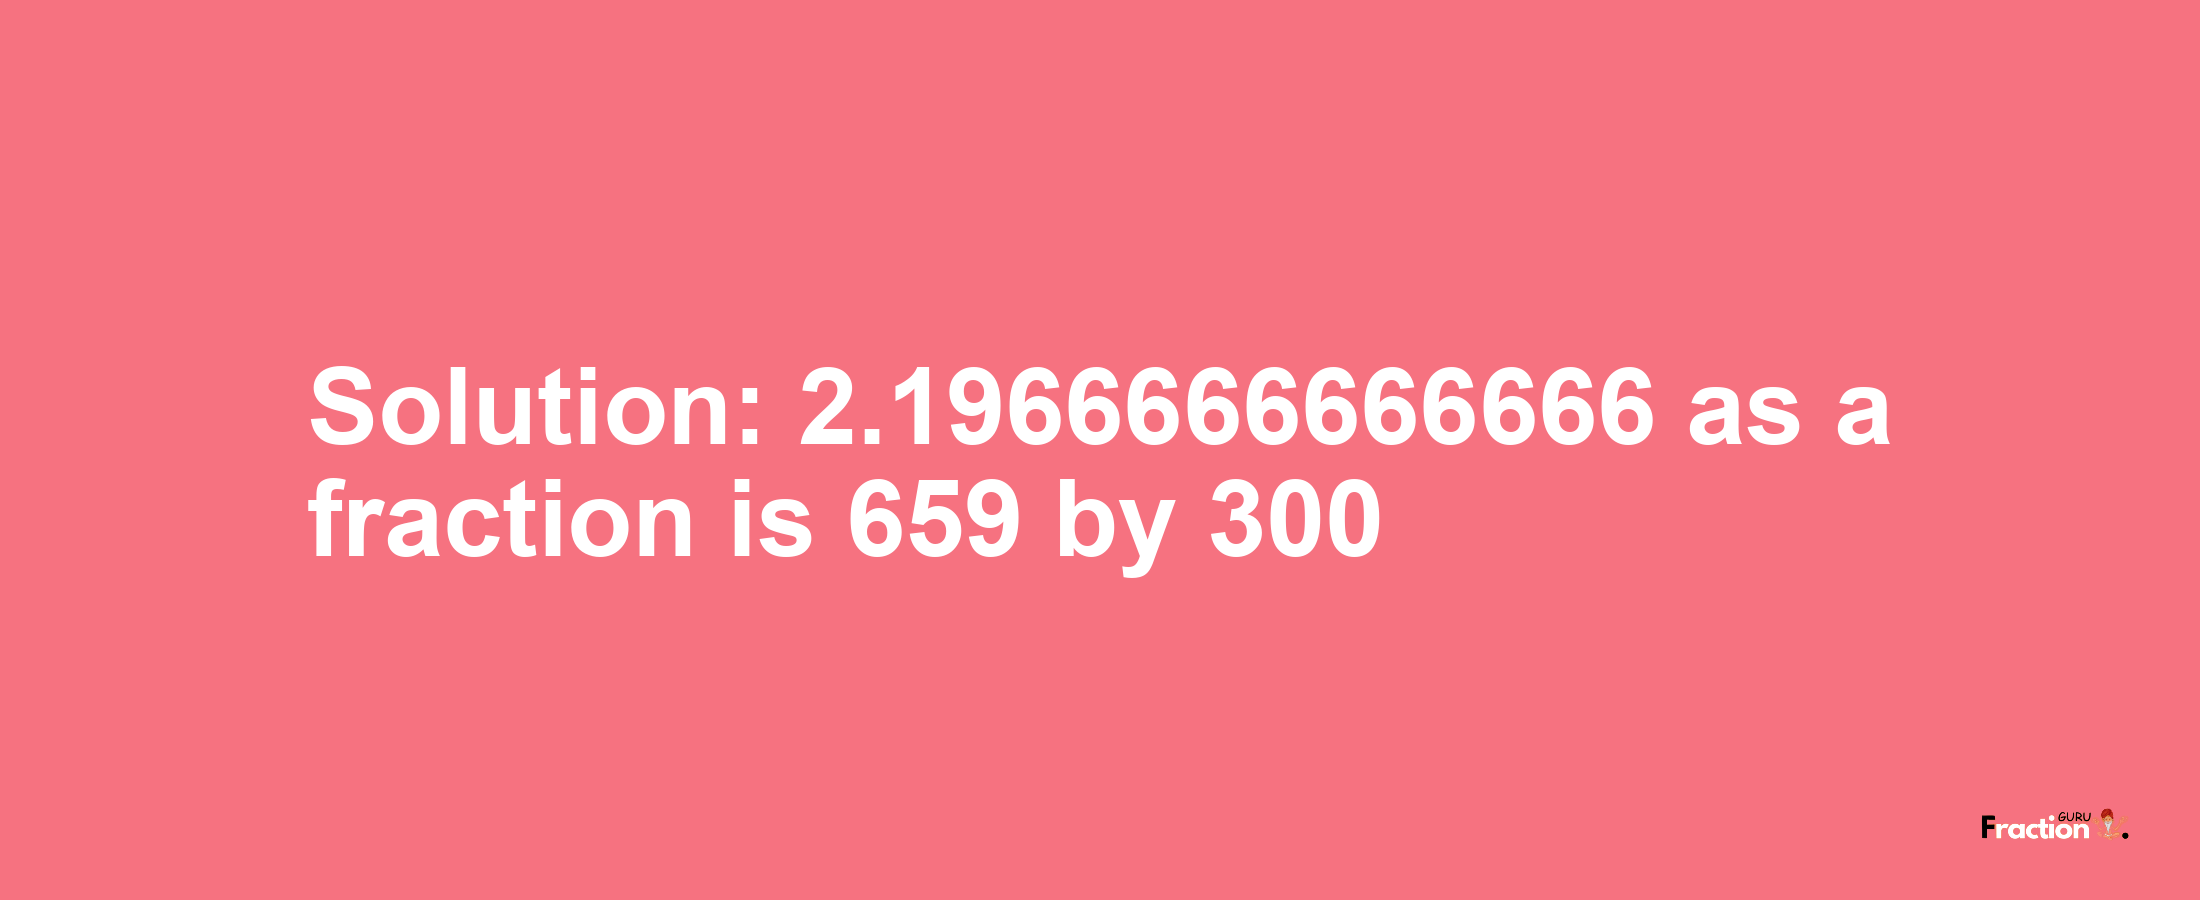 Solution:2.1966666666666 as a fraction is 659/300